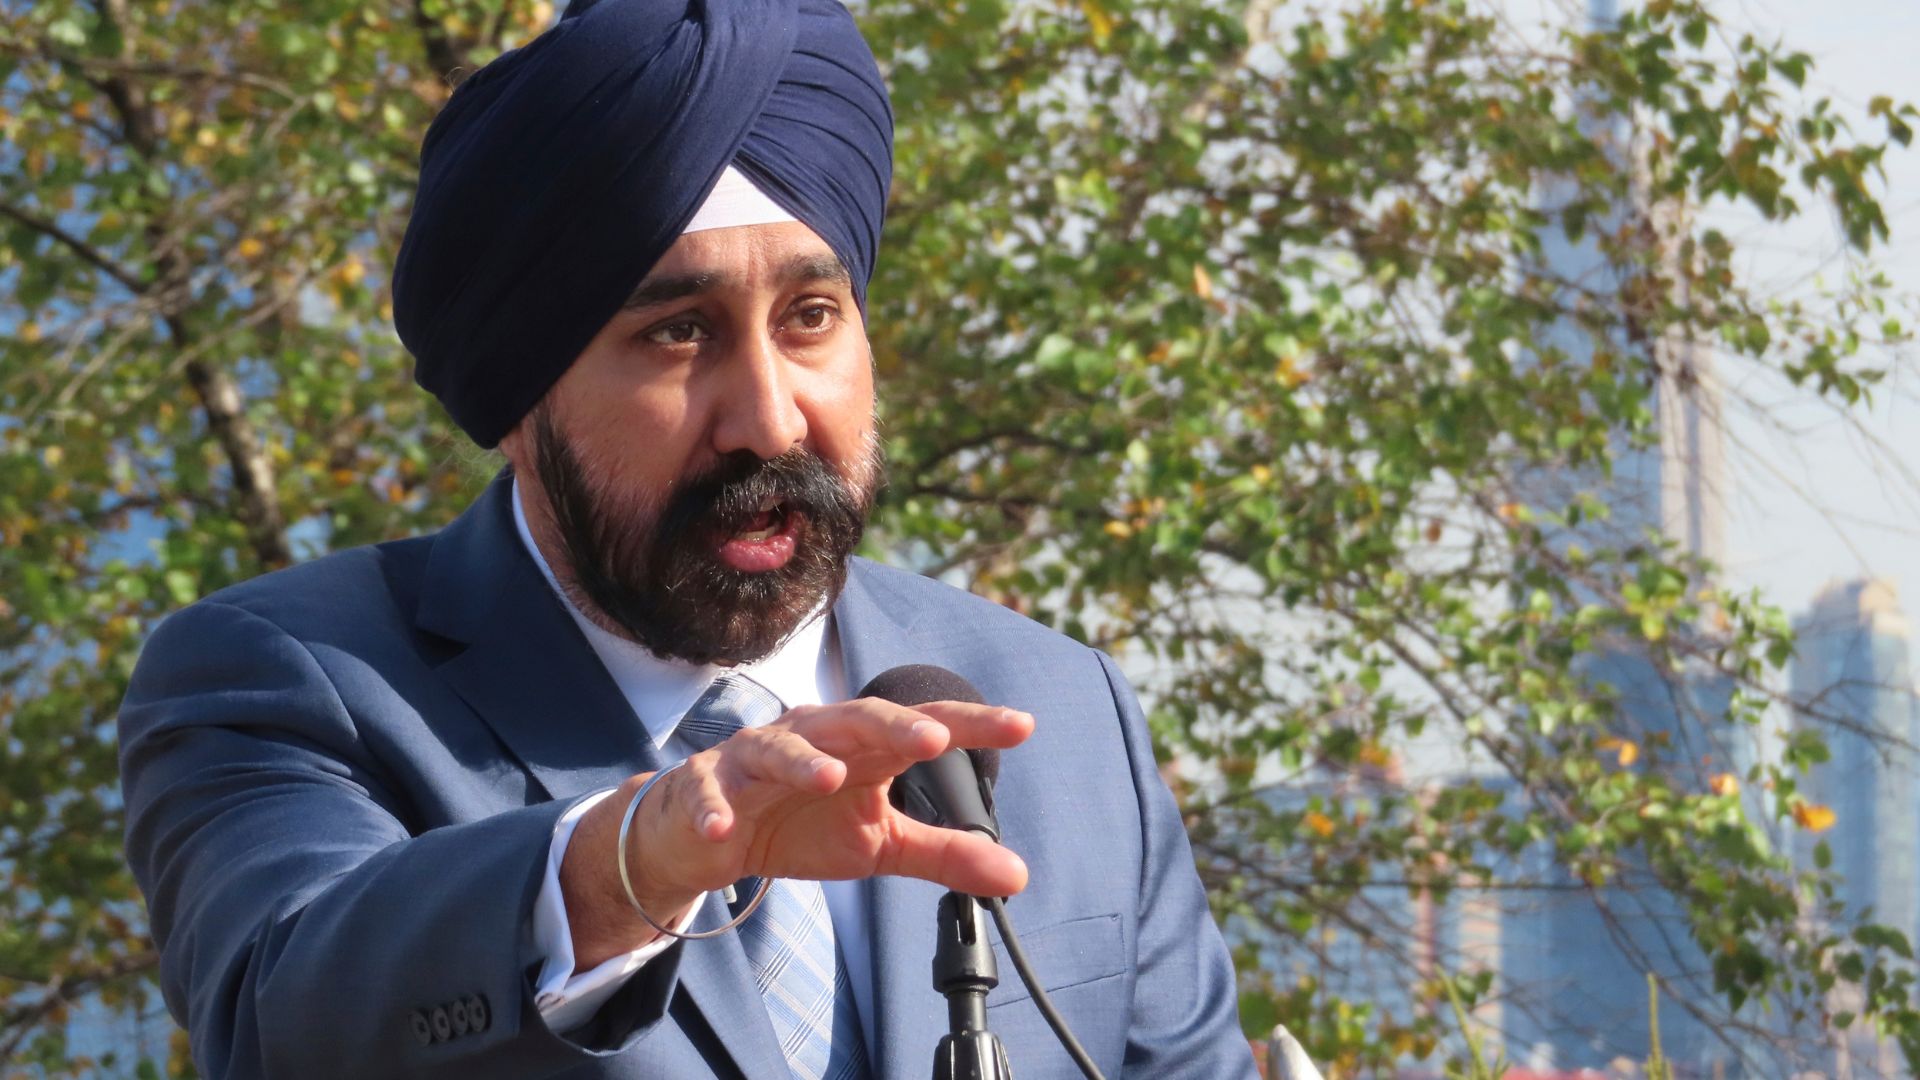 Hoboken Mayor Ravi Bhalla joins lawsuit to end “county party line” in New Jersey primaries